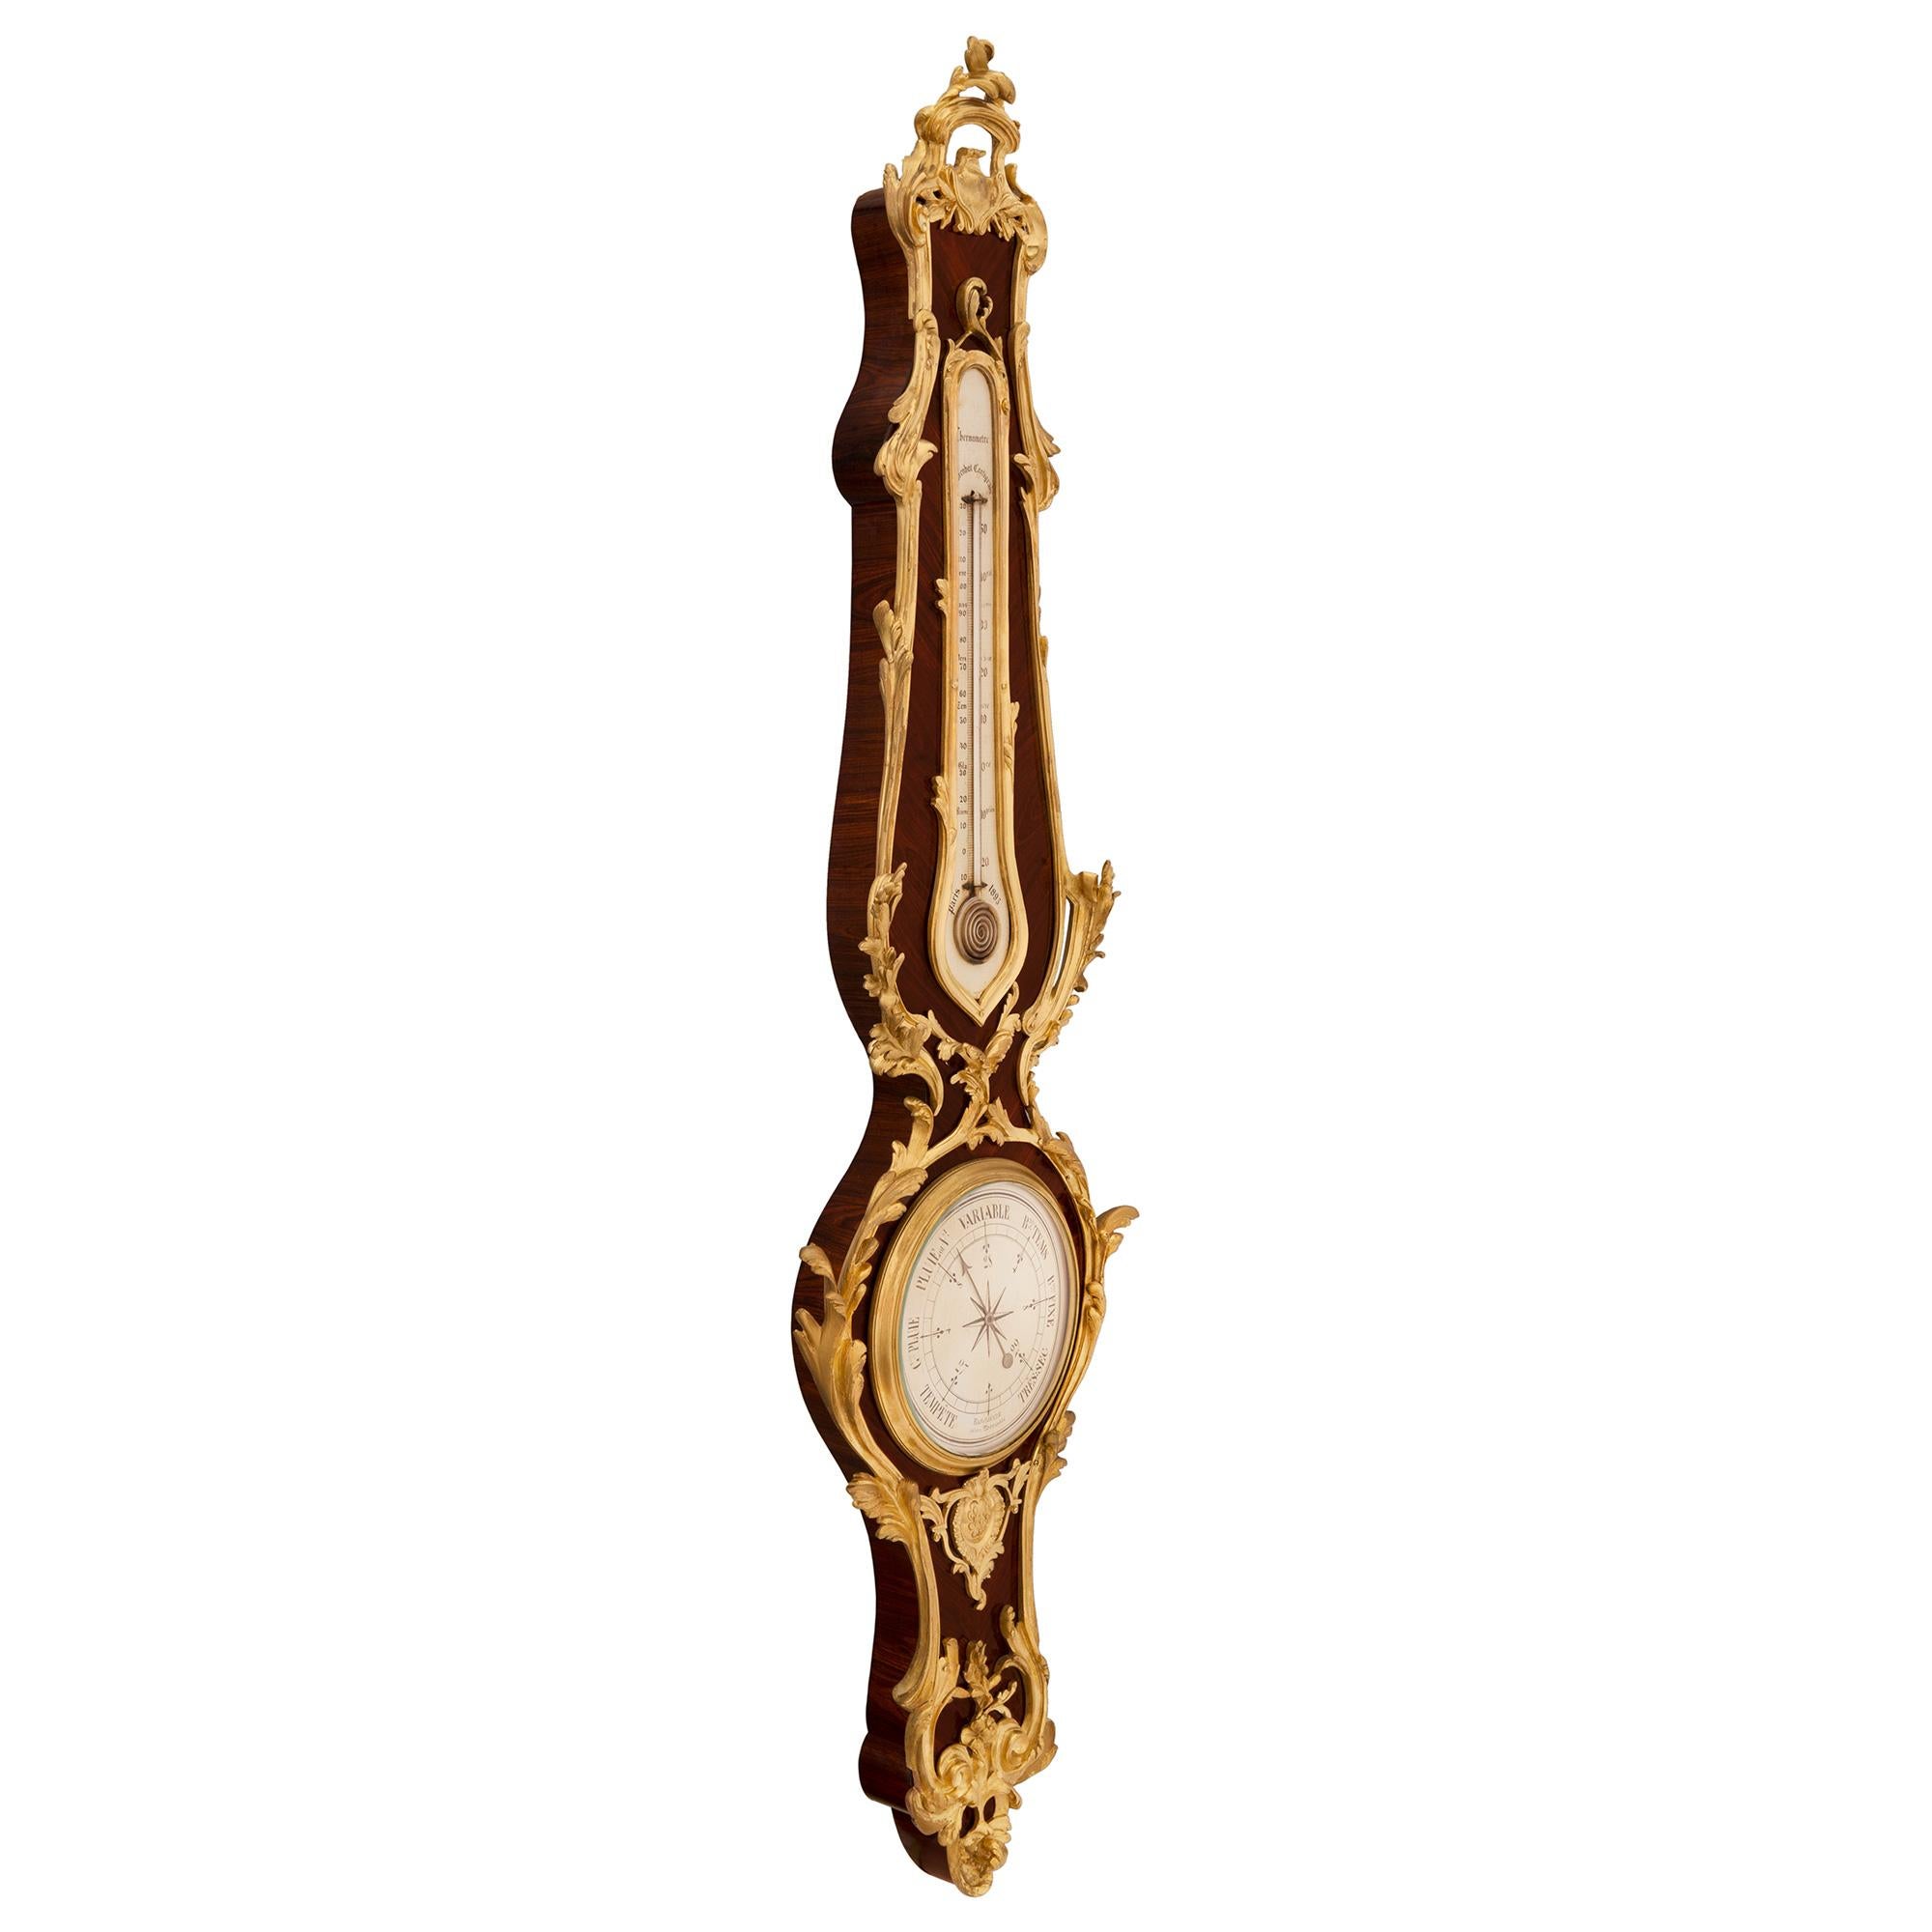 A stunning and extremely high quality French 19th century Louis XV st. kingwood and ormolu barometer/thermometer, signed F. Linke. The barometer is centered by a fine richly chased foliate bottom reserve with elegant scrolled designs that extend